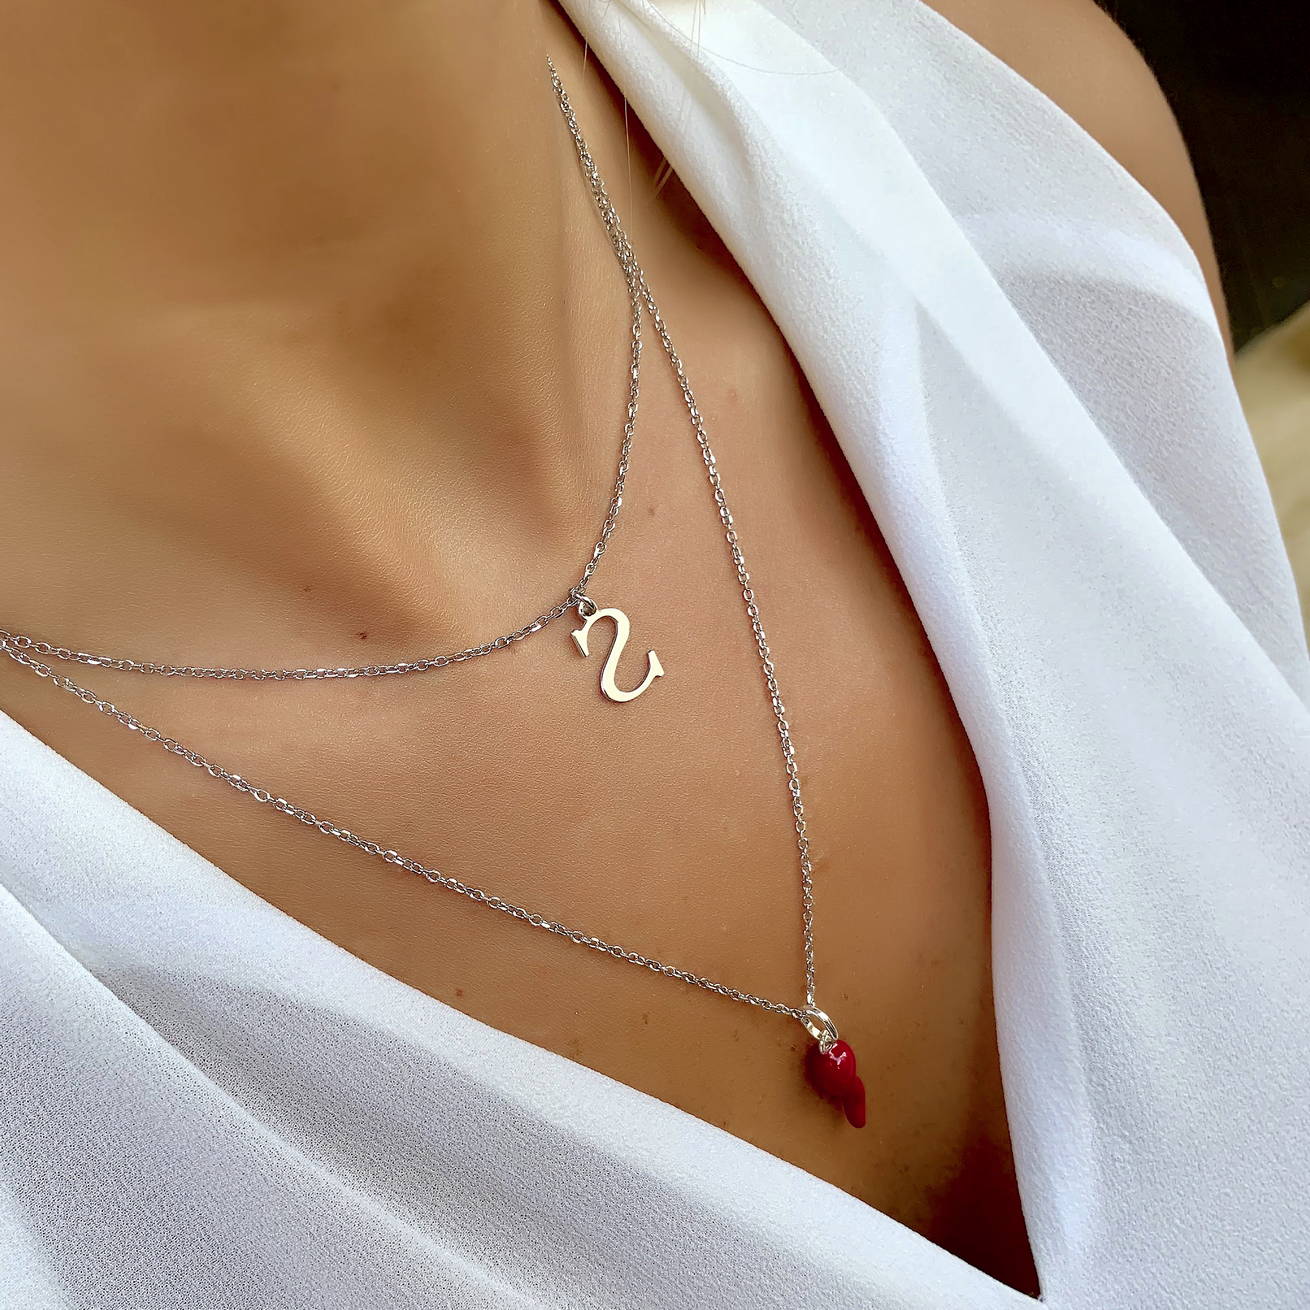 A woman wears a necklace with her initial on it that she got for Christmas.